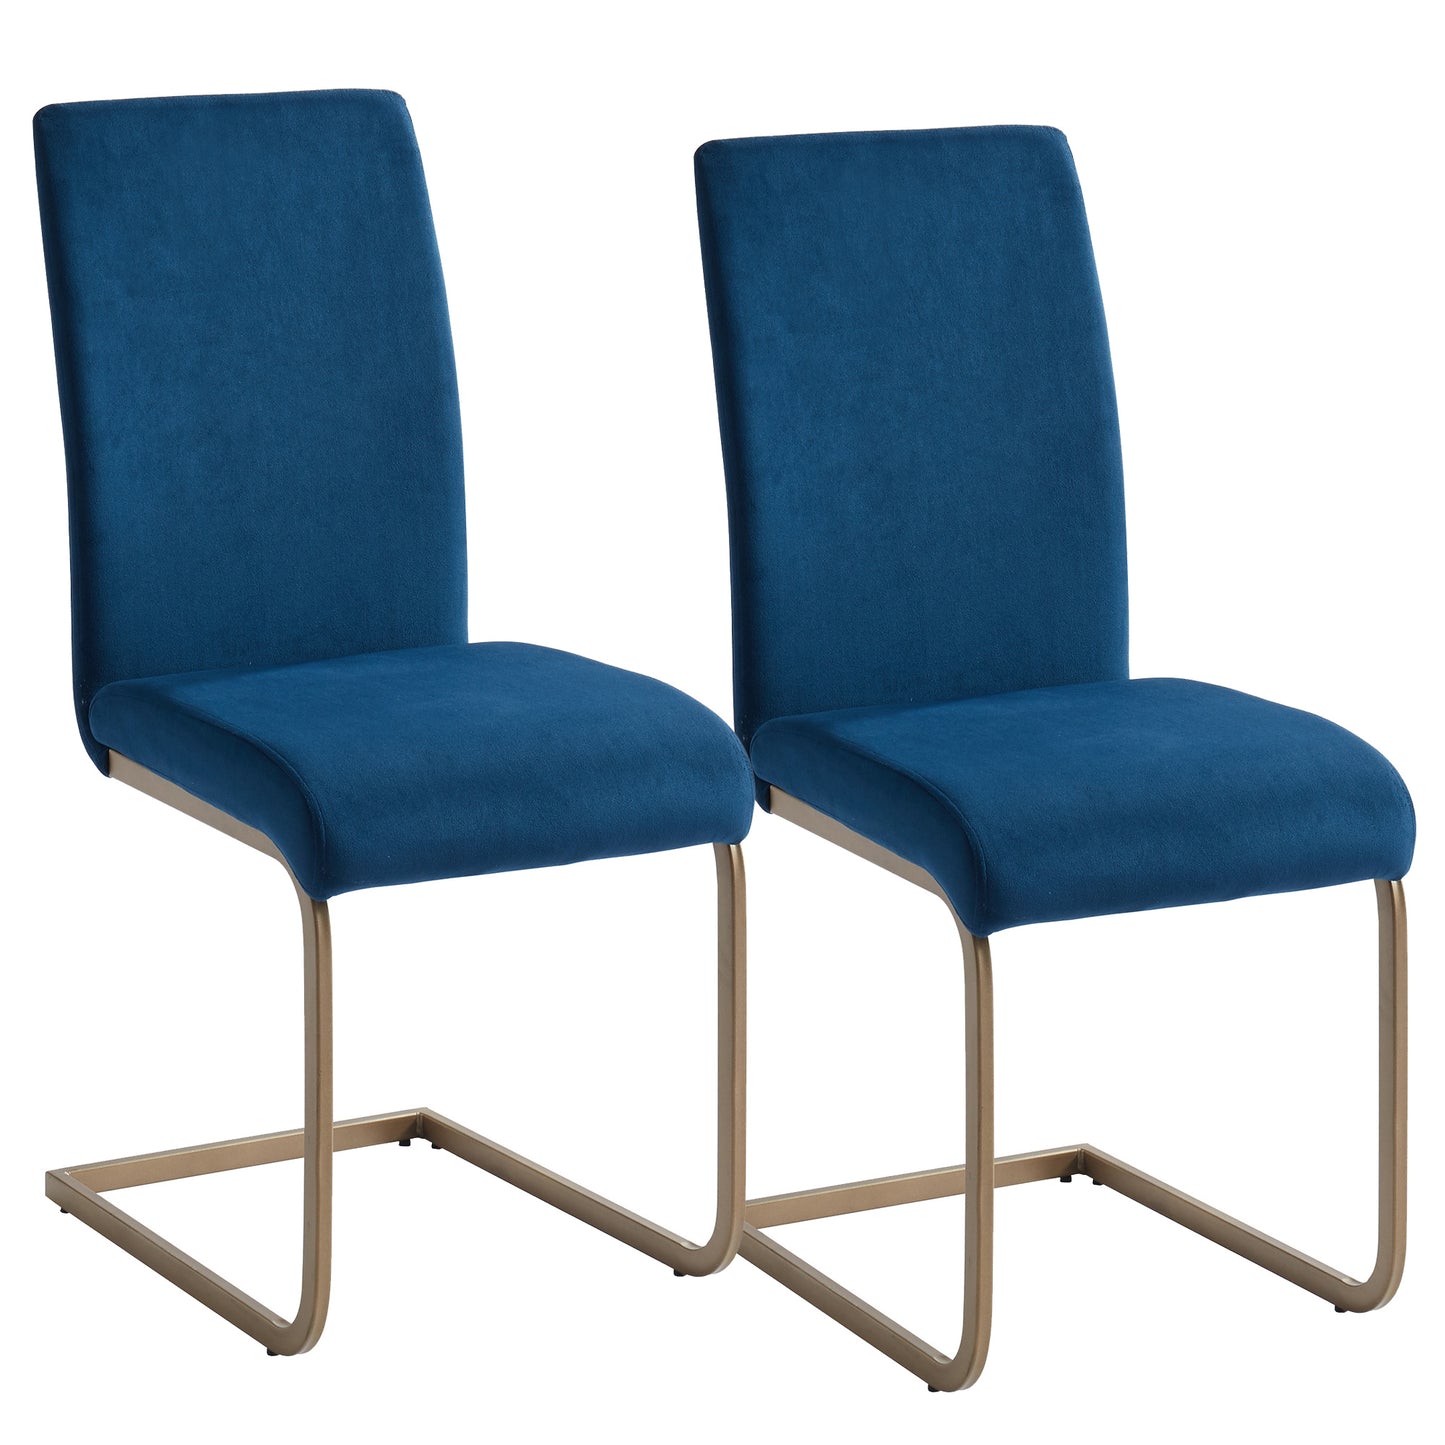 (VESPA BLUE- 2 PACK)- FABRIC- DINING CHAIRS